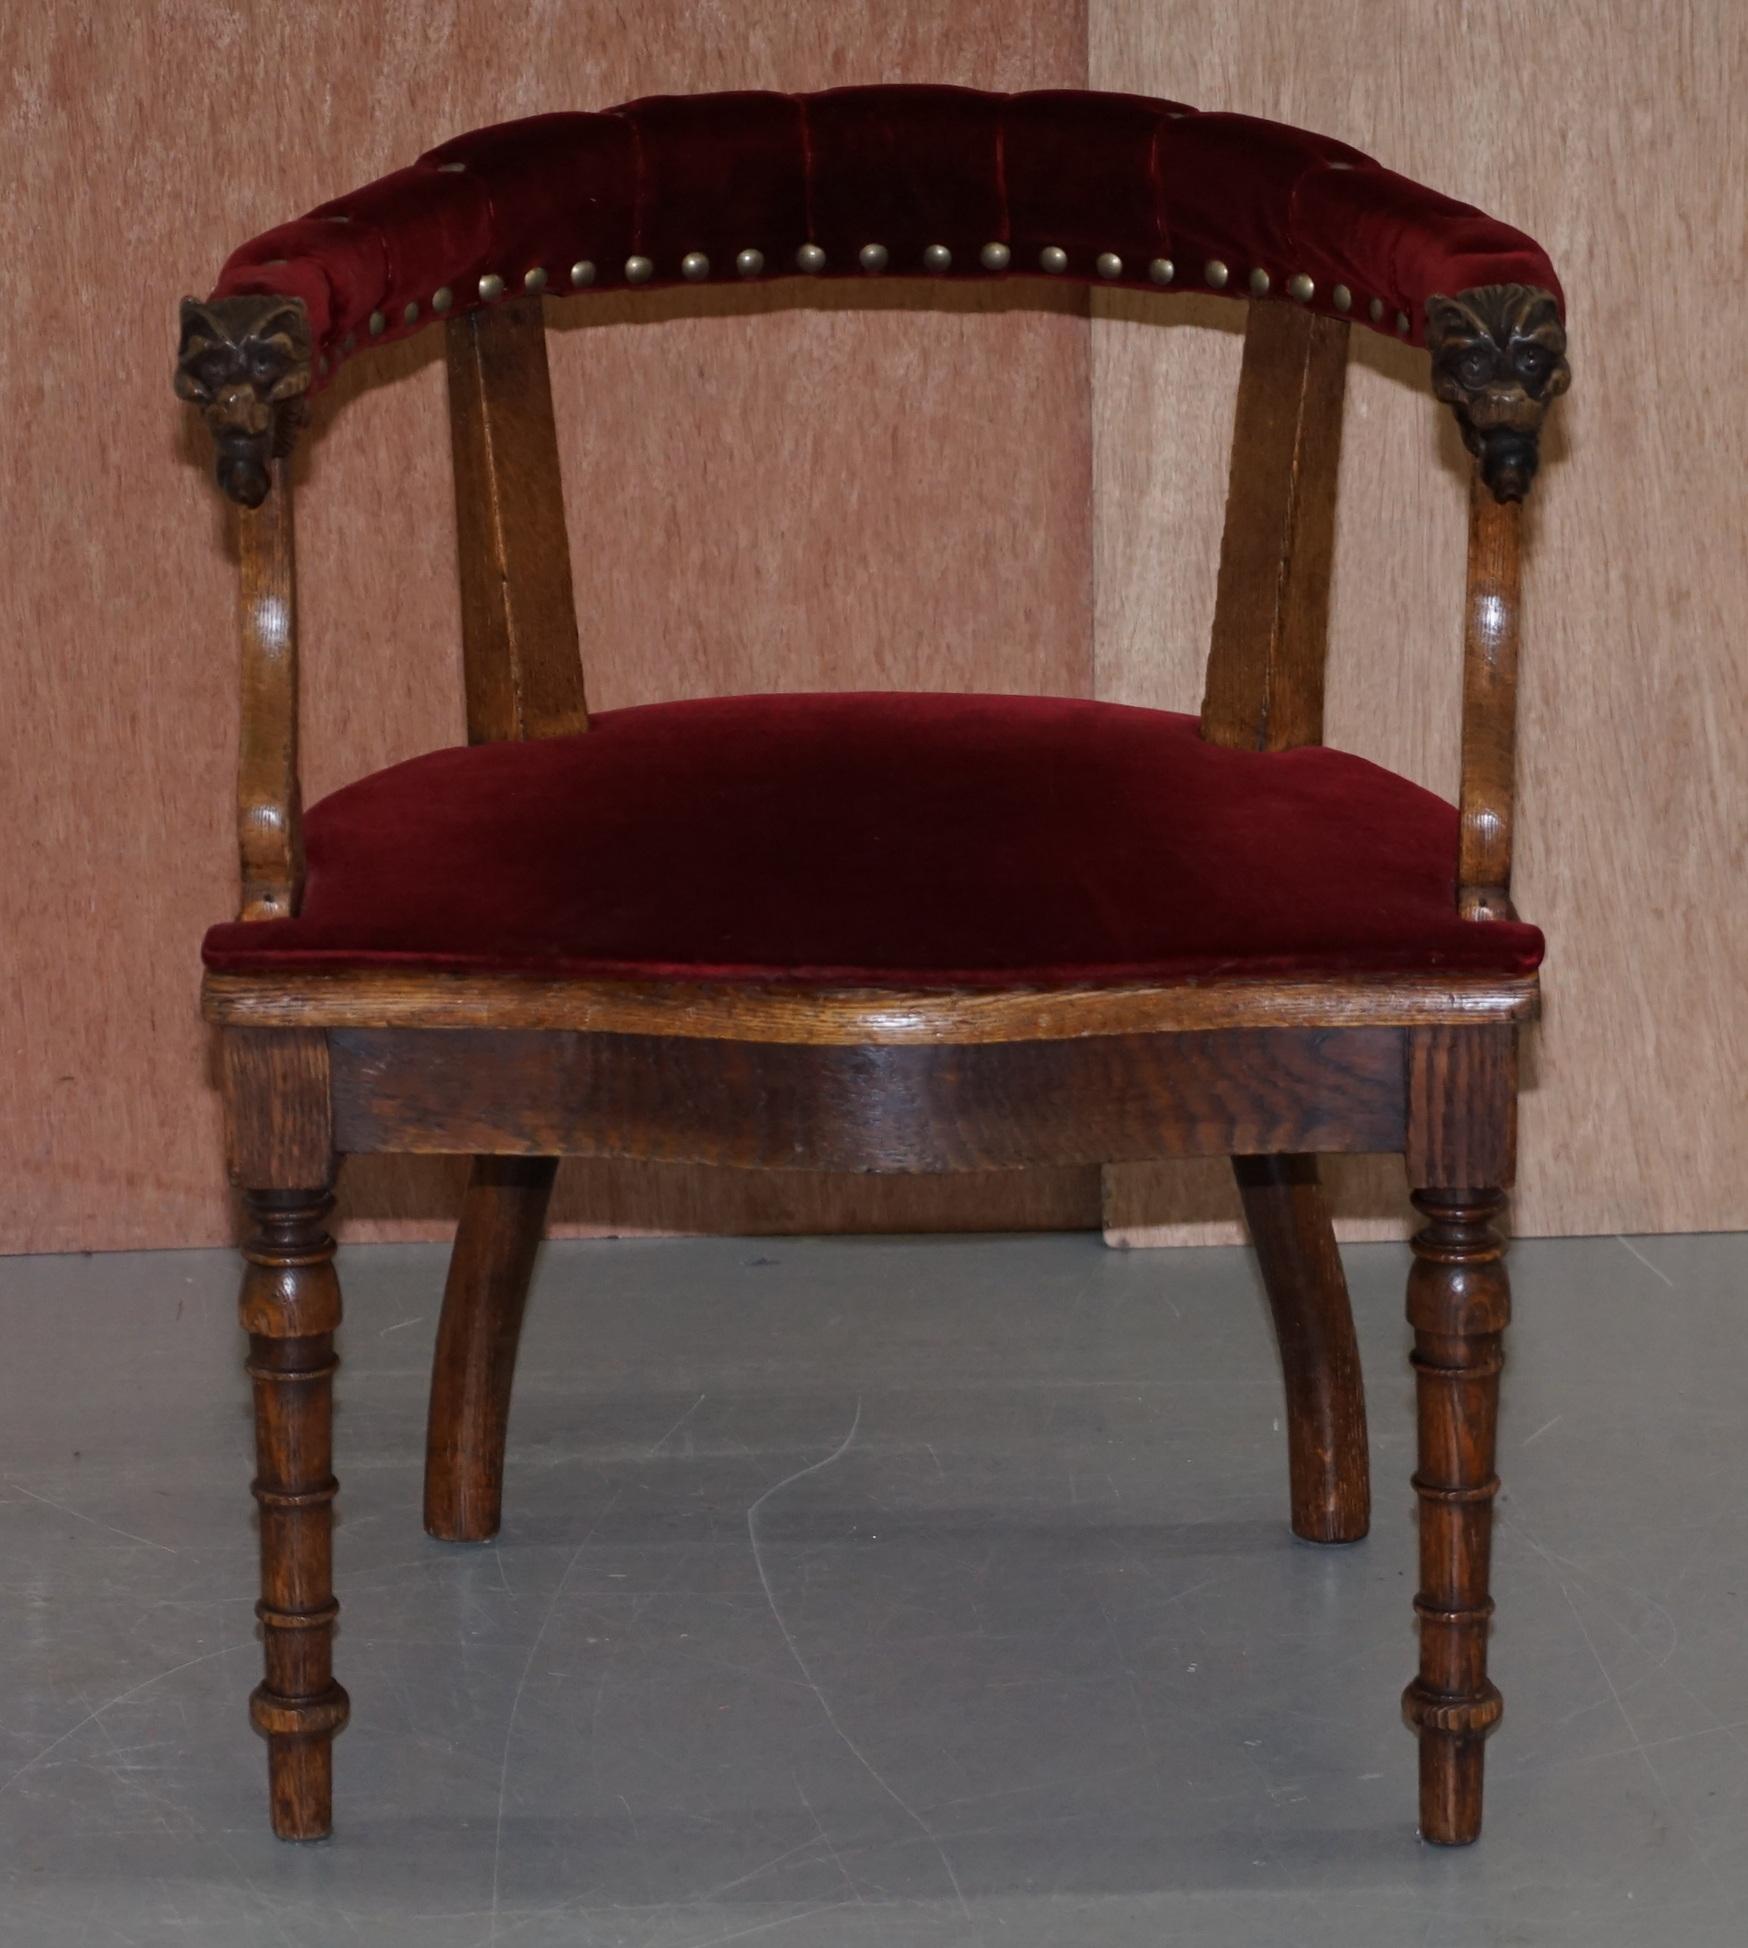 Wimbledon-Furniture

Wimbledon-Furniture is delighted to offer for sale this lovely original Regency Oak Bergere armchair with Lions head arms

Please note the delivery fee listed is just a guide, it covers within the M25 only, for an accurate quote